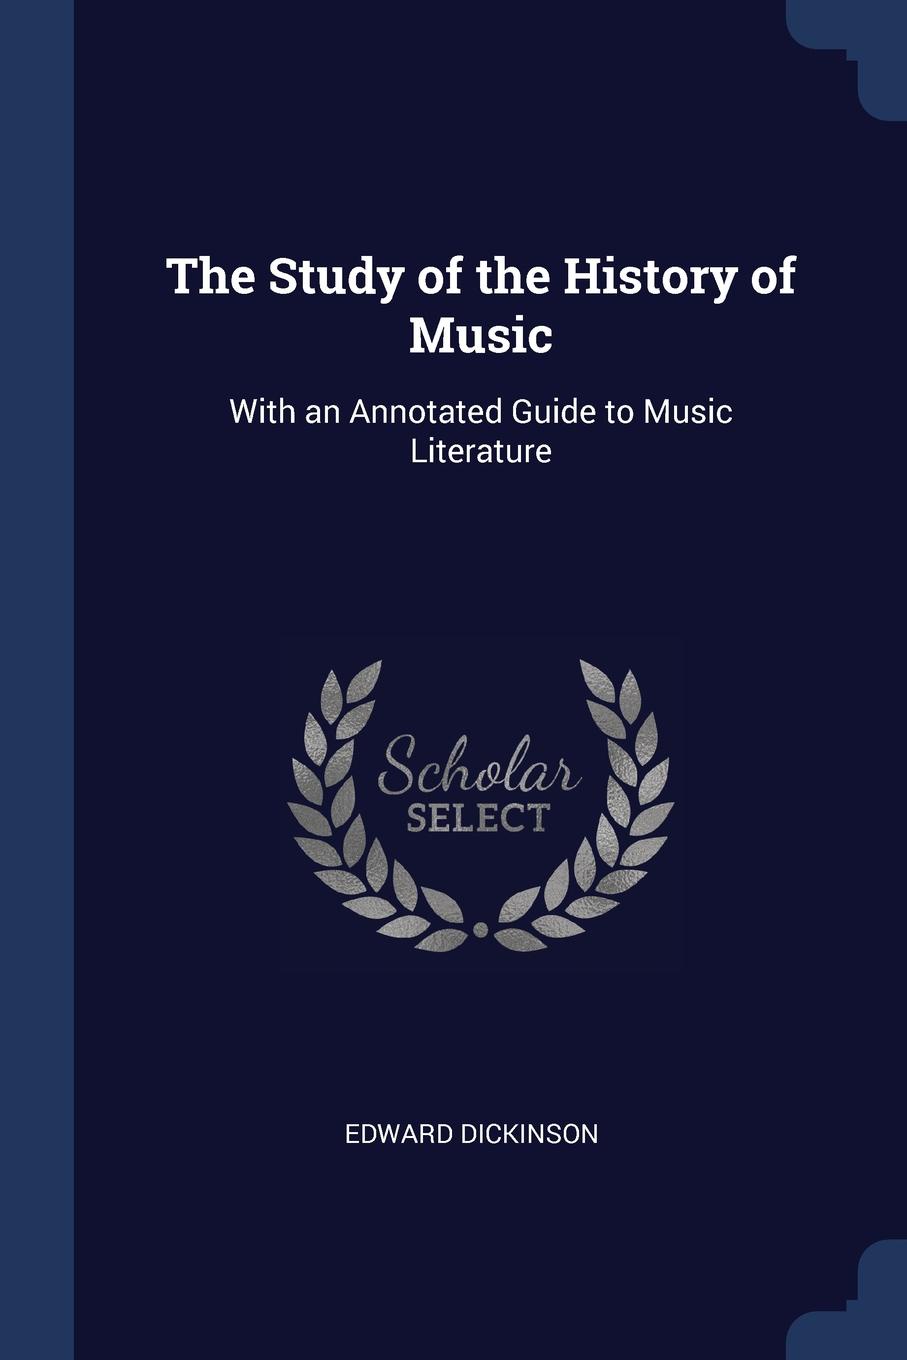 The Study of the History of Music. With an Annotated Guide to Music Literature